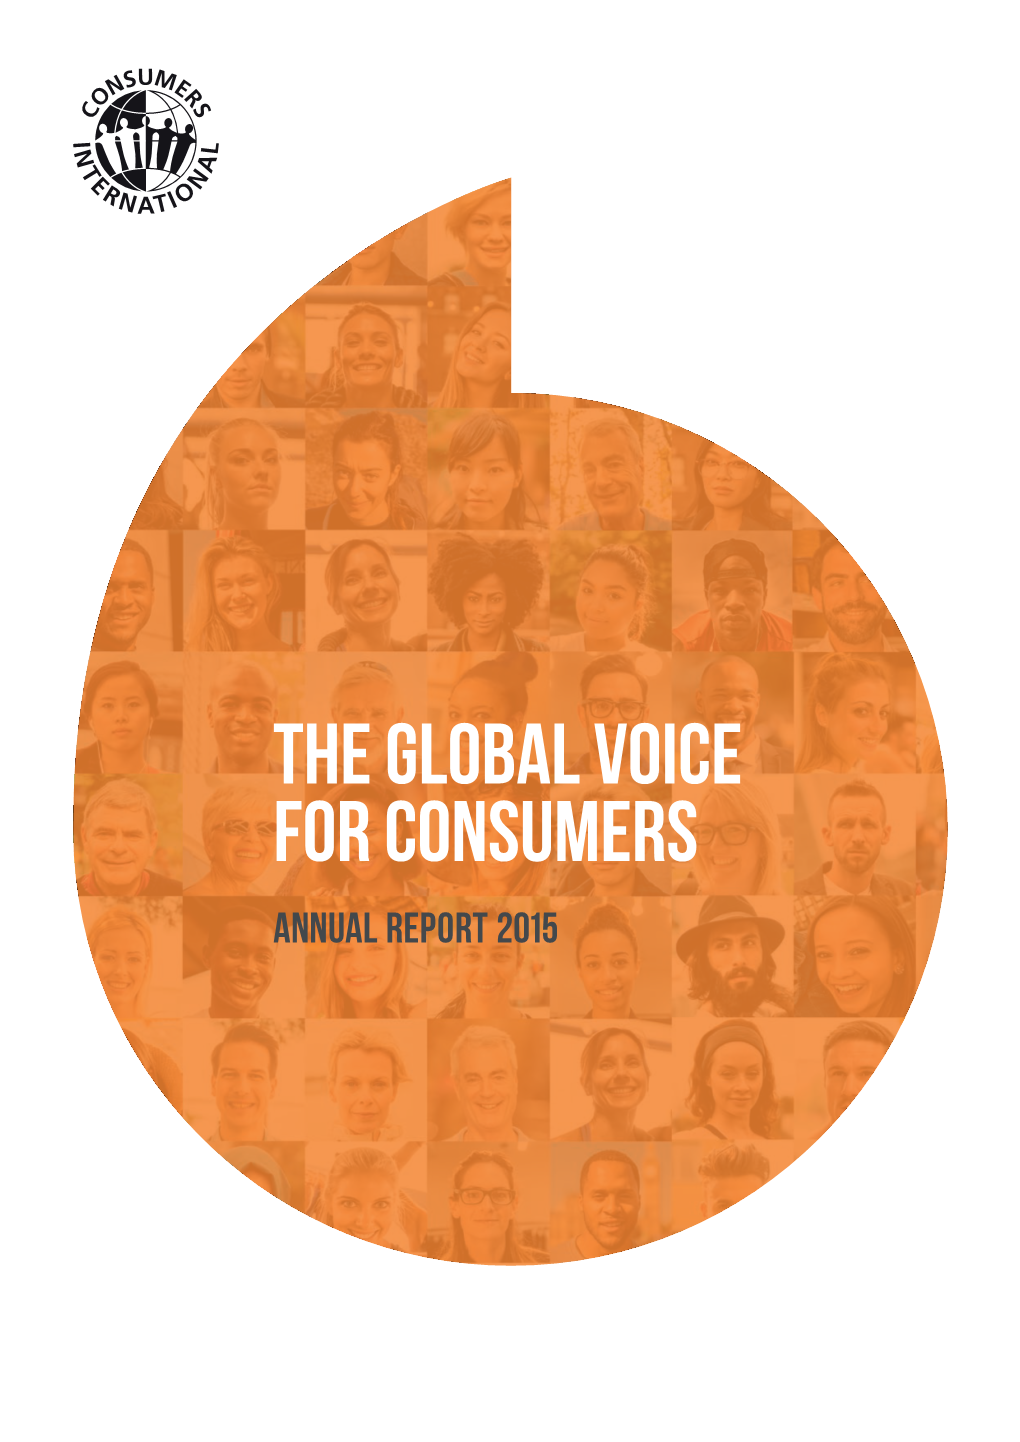 The Global Voice for Consumers